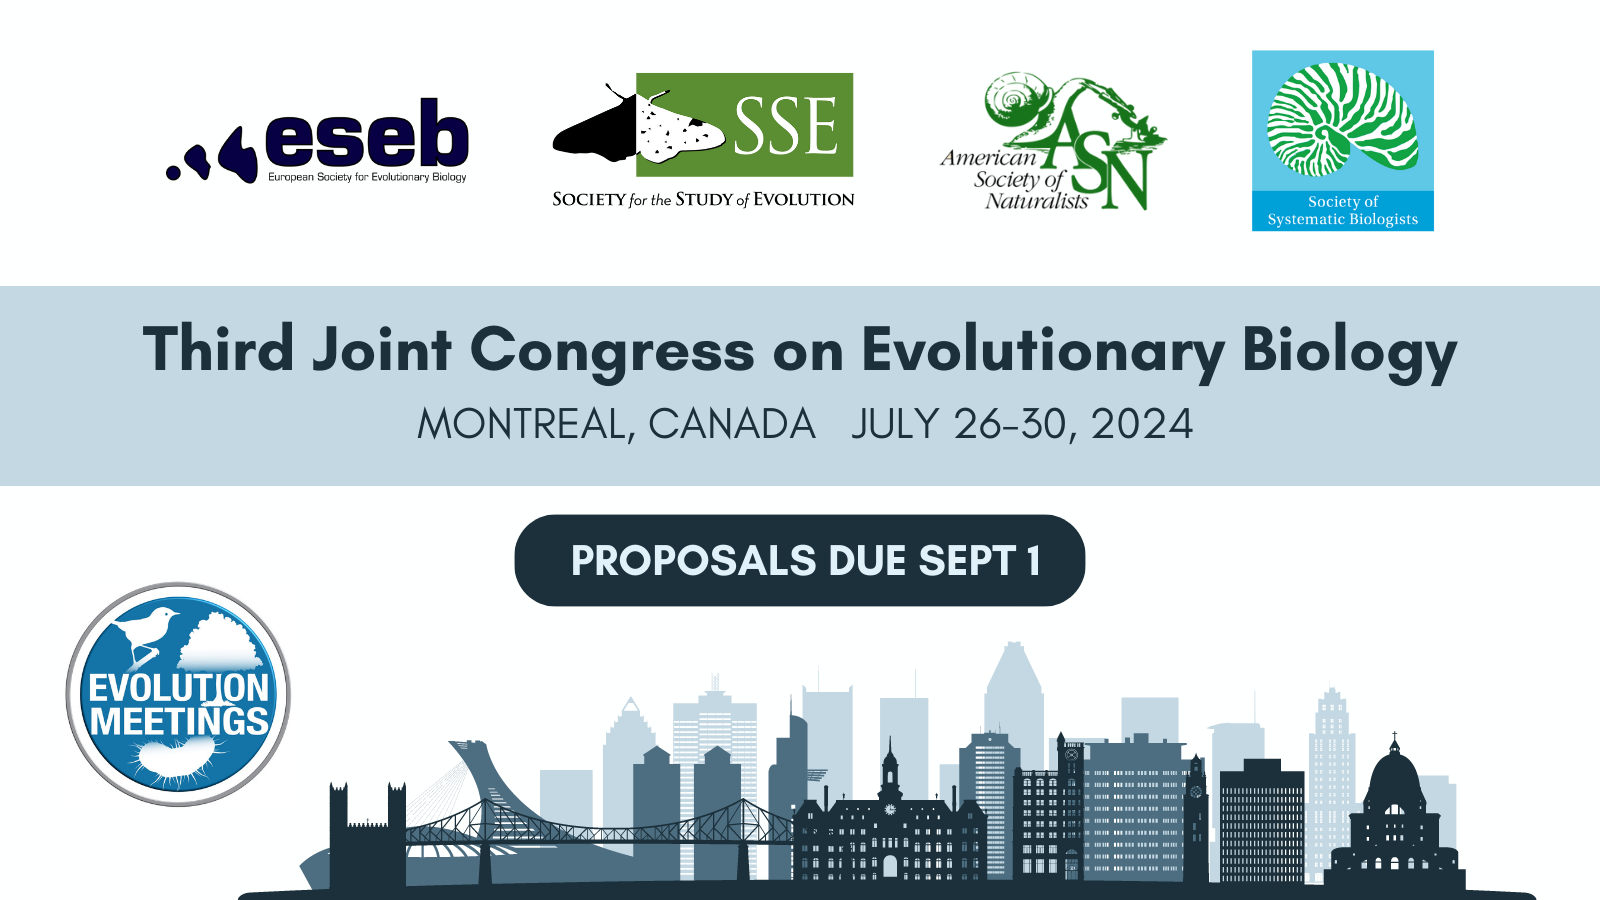 Logos for ESEB, SSE, ASN, SSB, and Evolution Meetings. Simplified skyline of Montreal. Text: Third Joint Congress on Evolutionary Biology, Montreal, Canada, July 26-30, 2024, Proposals due September 1.